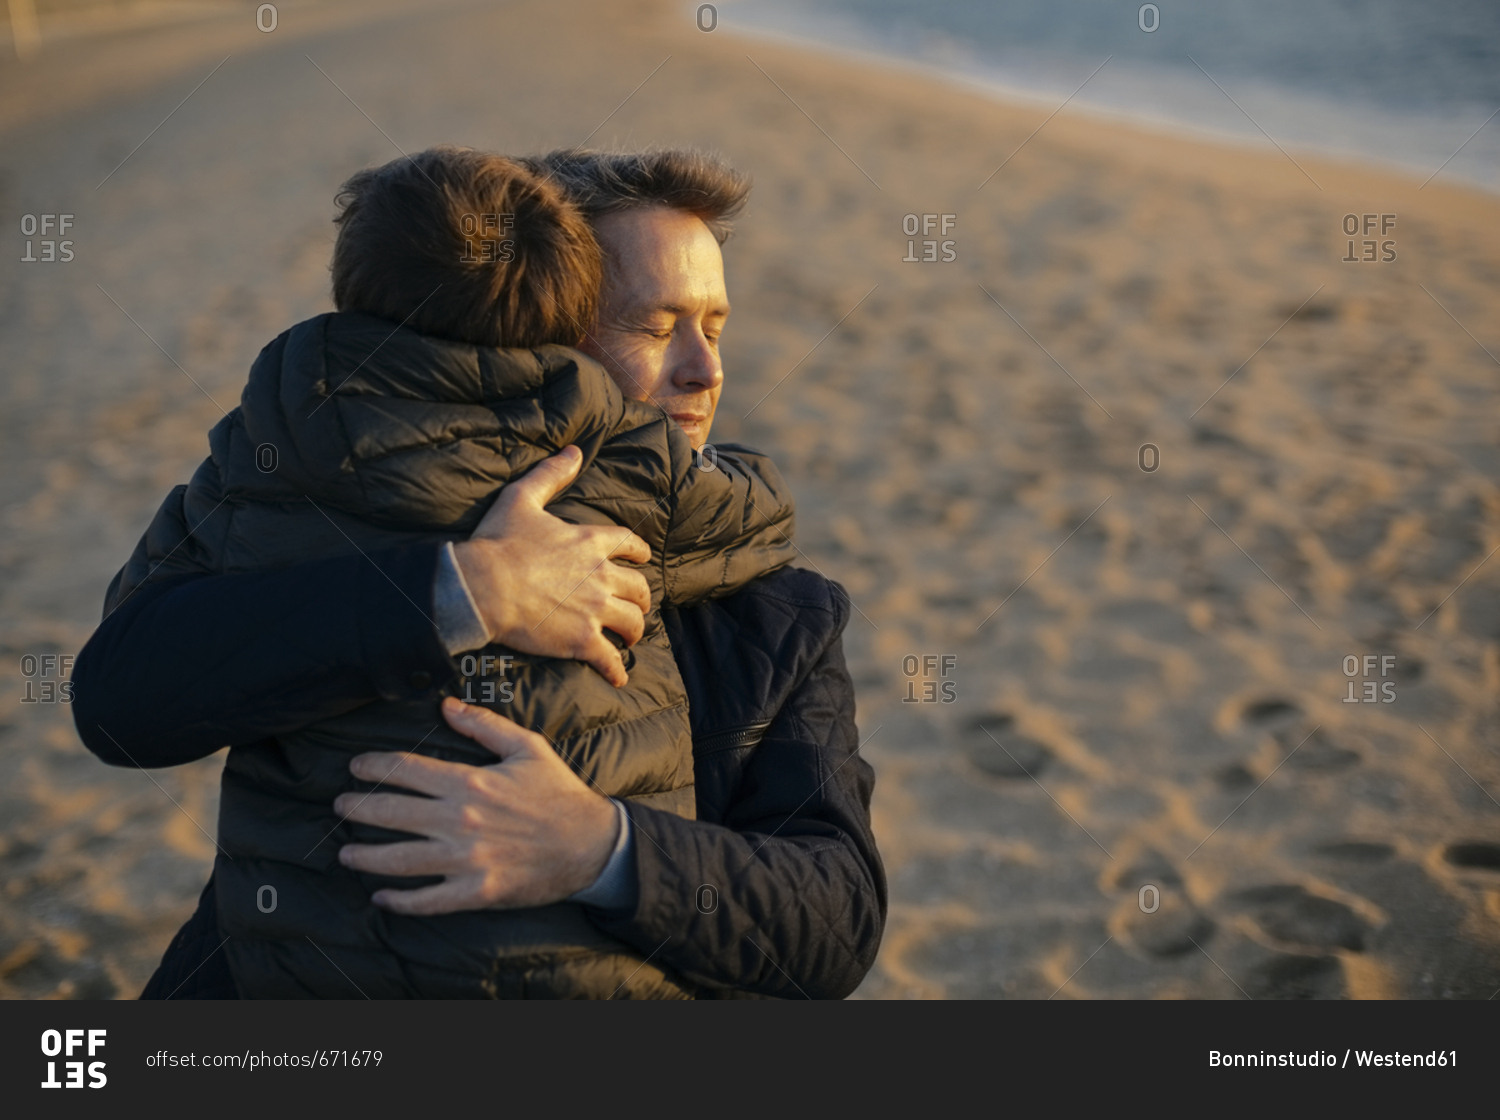 Father hugging son on the beach